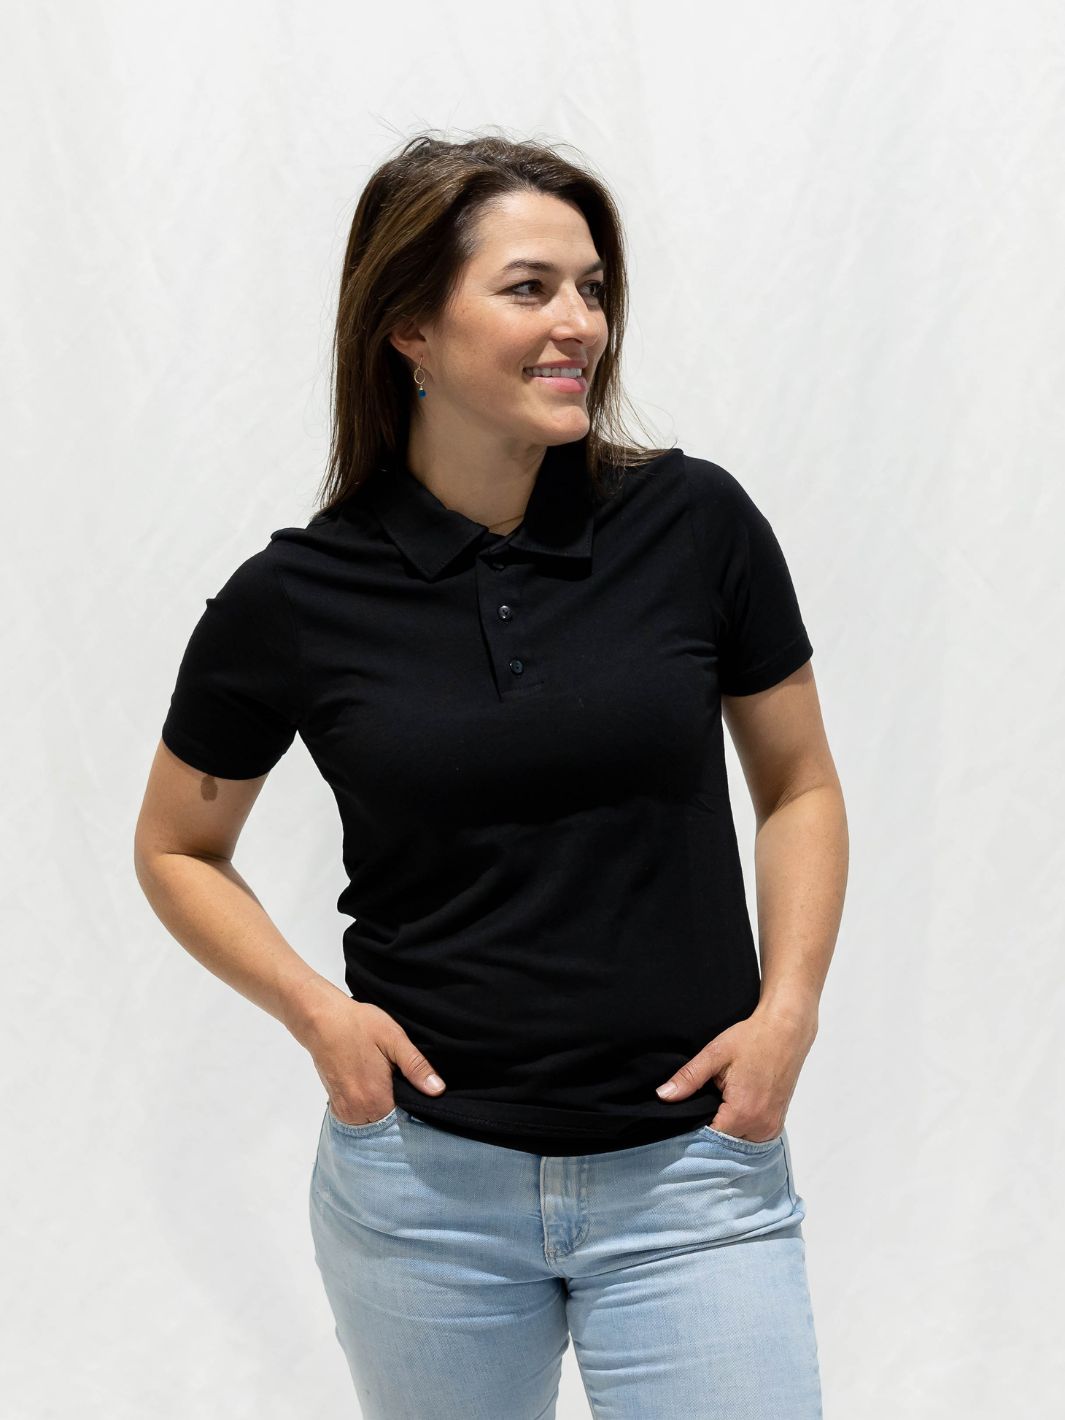 Individual pairing their black Local Laundry Inglewood Polo shirt with a pair of blue jeans. This polo is made in Canada and constructed of bamboo to ensure it's comfortable and cool to wear.